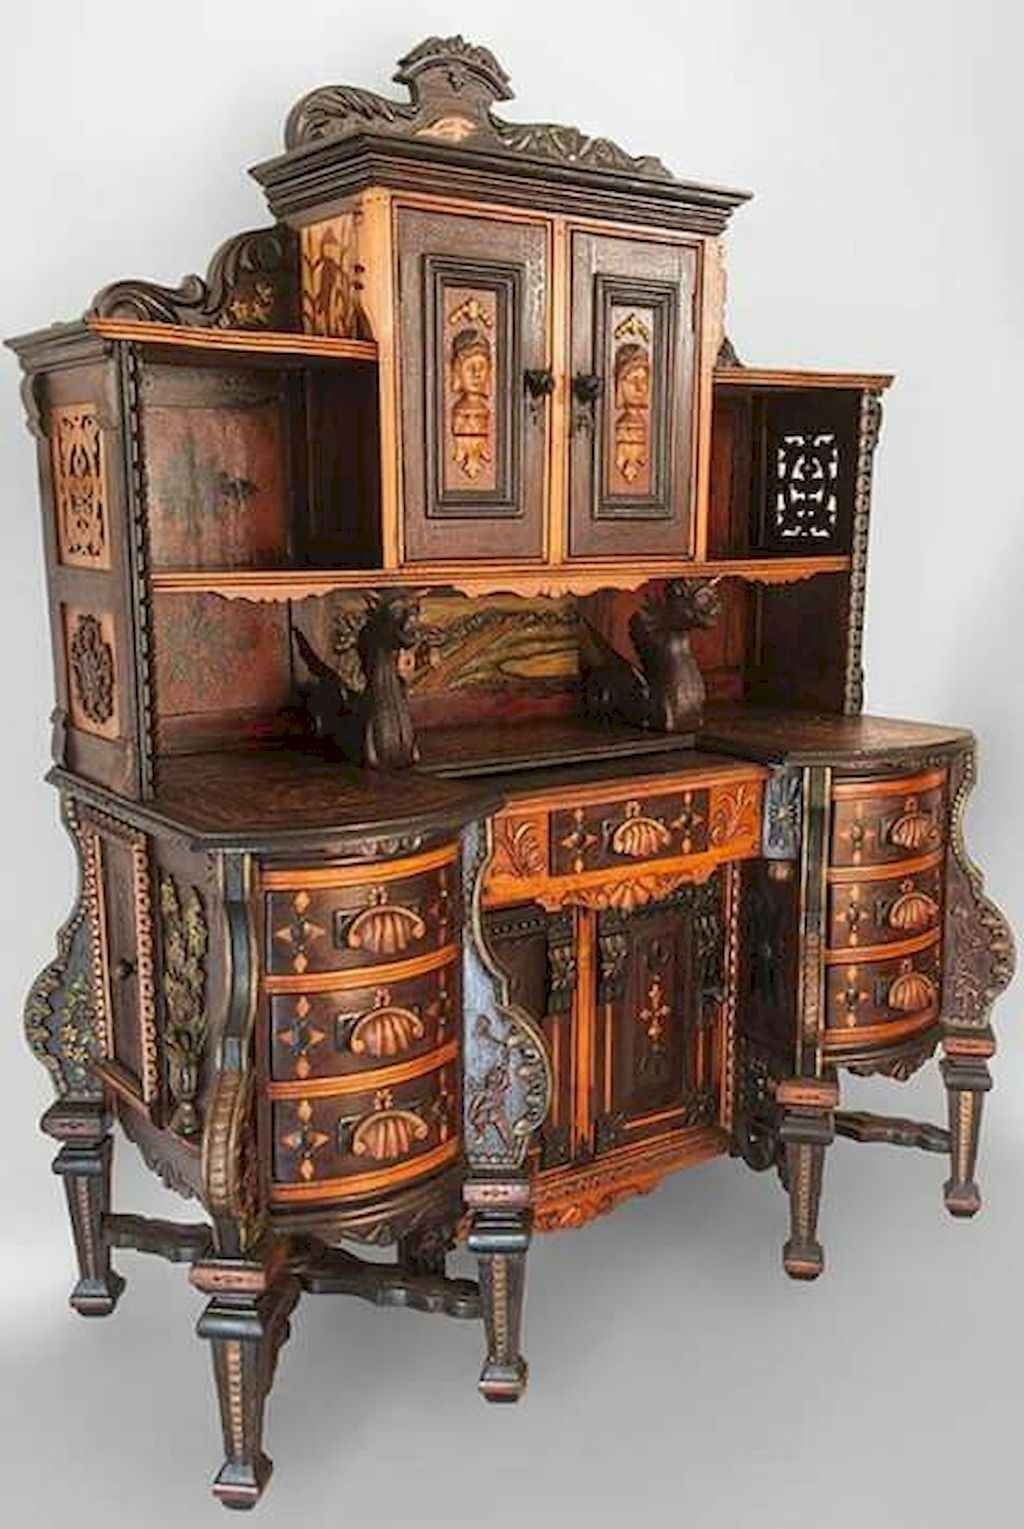 Hand carved wood furniture